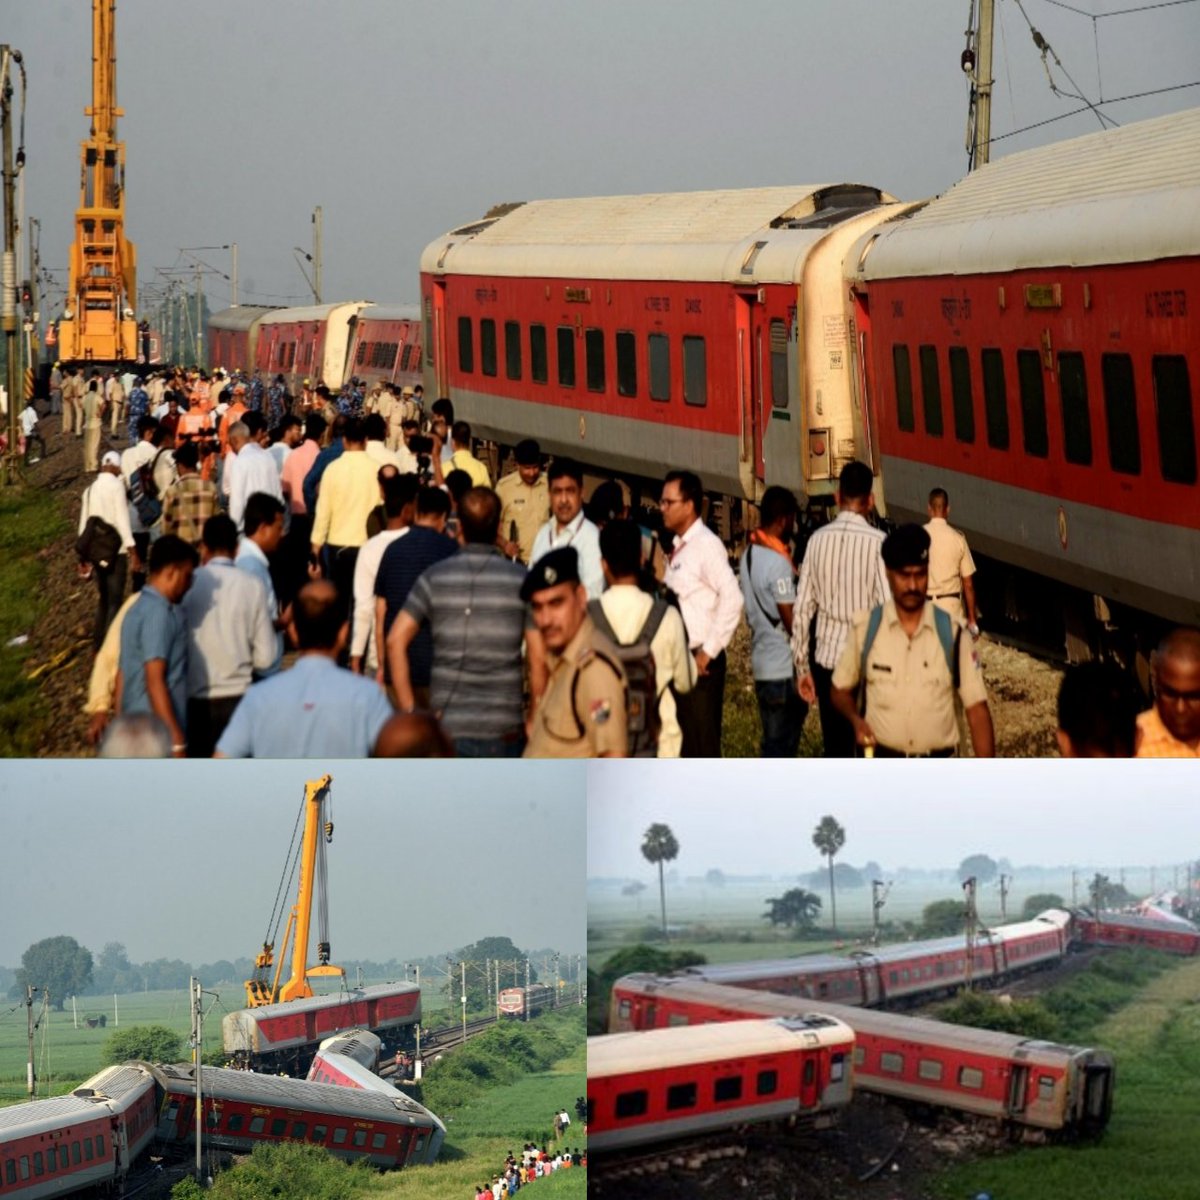 Godi media silent Rubika Ali interview Akshay Kumar Rupika questions Narendra Modi tonic My exclusive Fault in tracks likely cause for derailment of #NorthEastExpress train; engineering dept responsible, finds preliminary probe #Railways